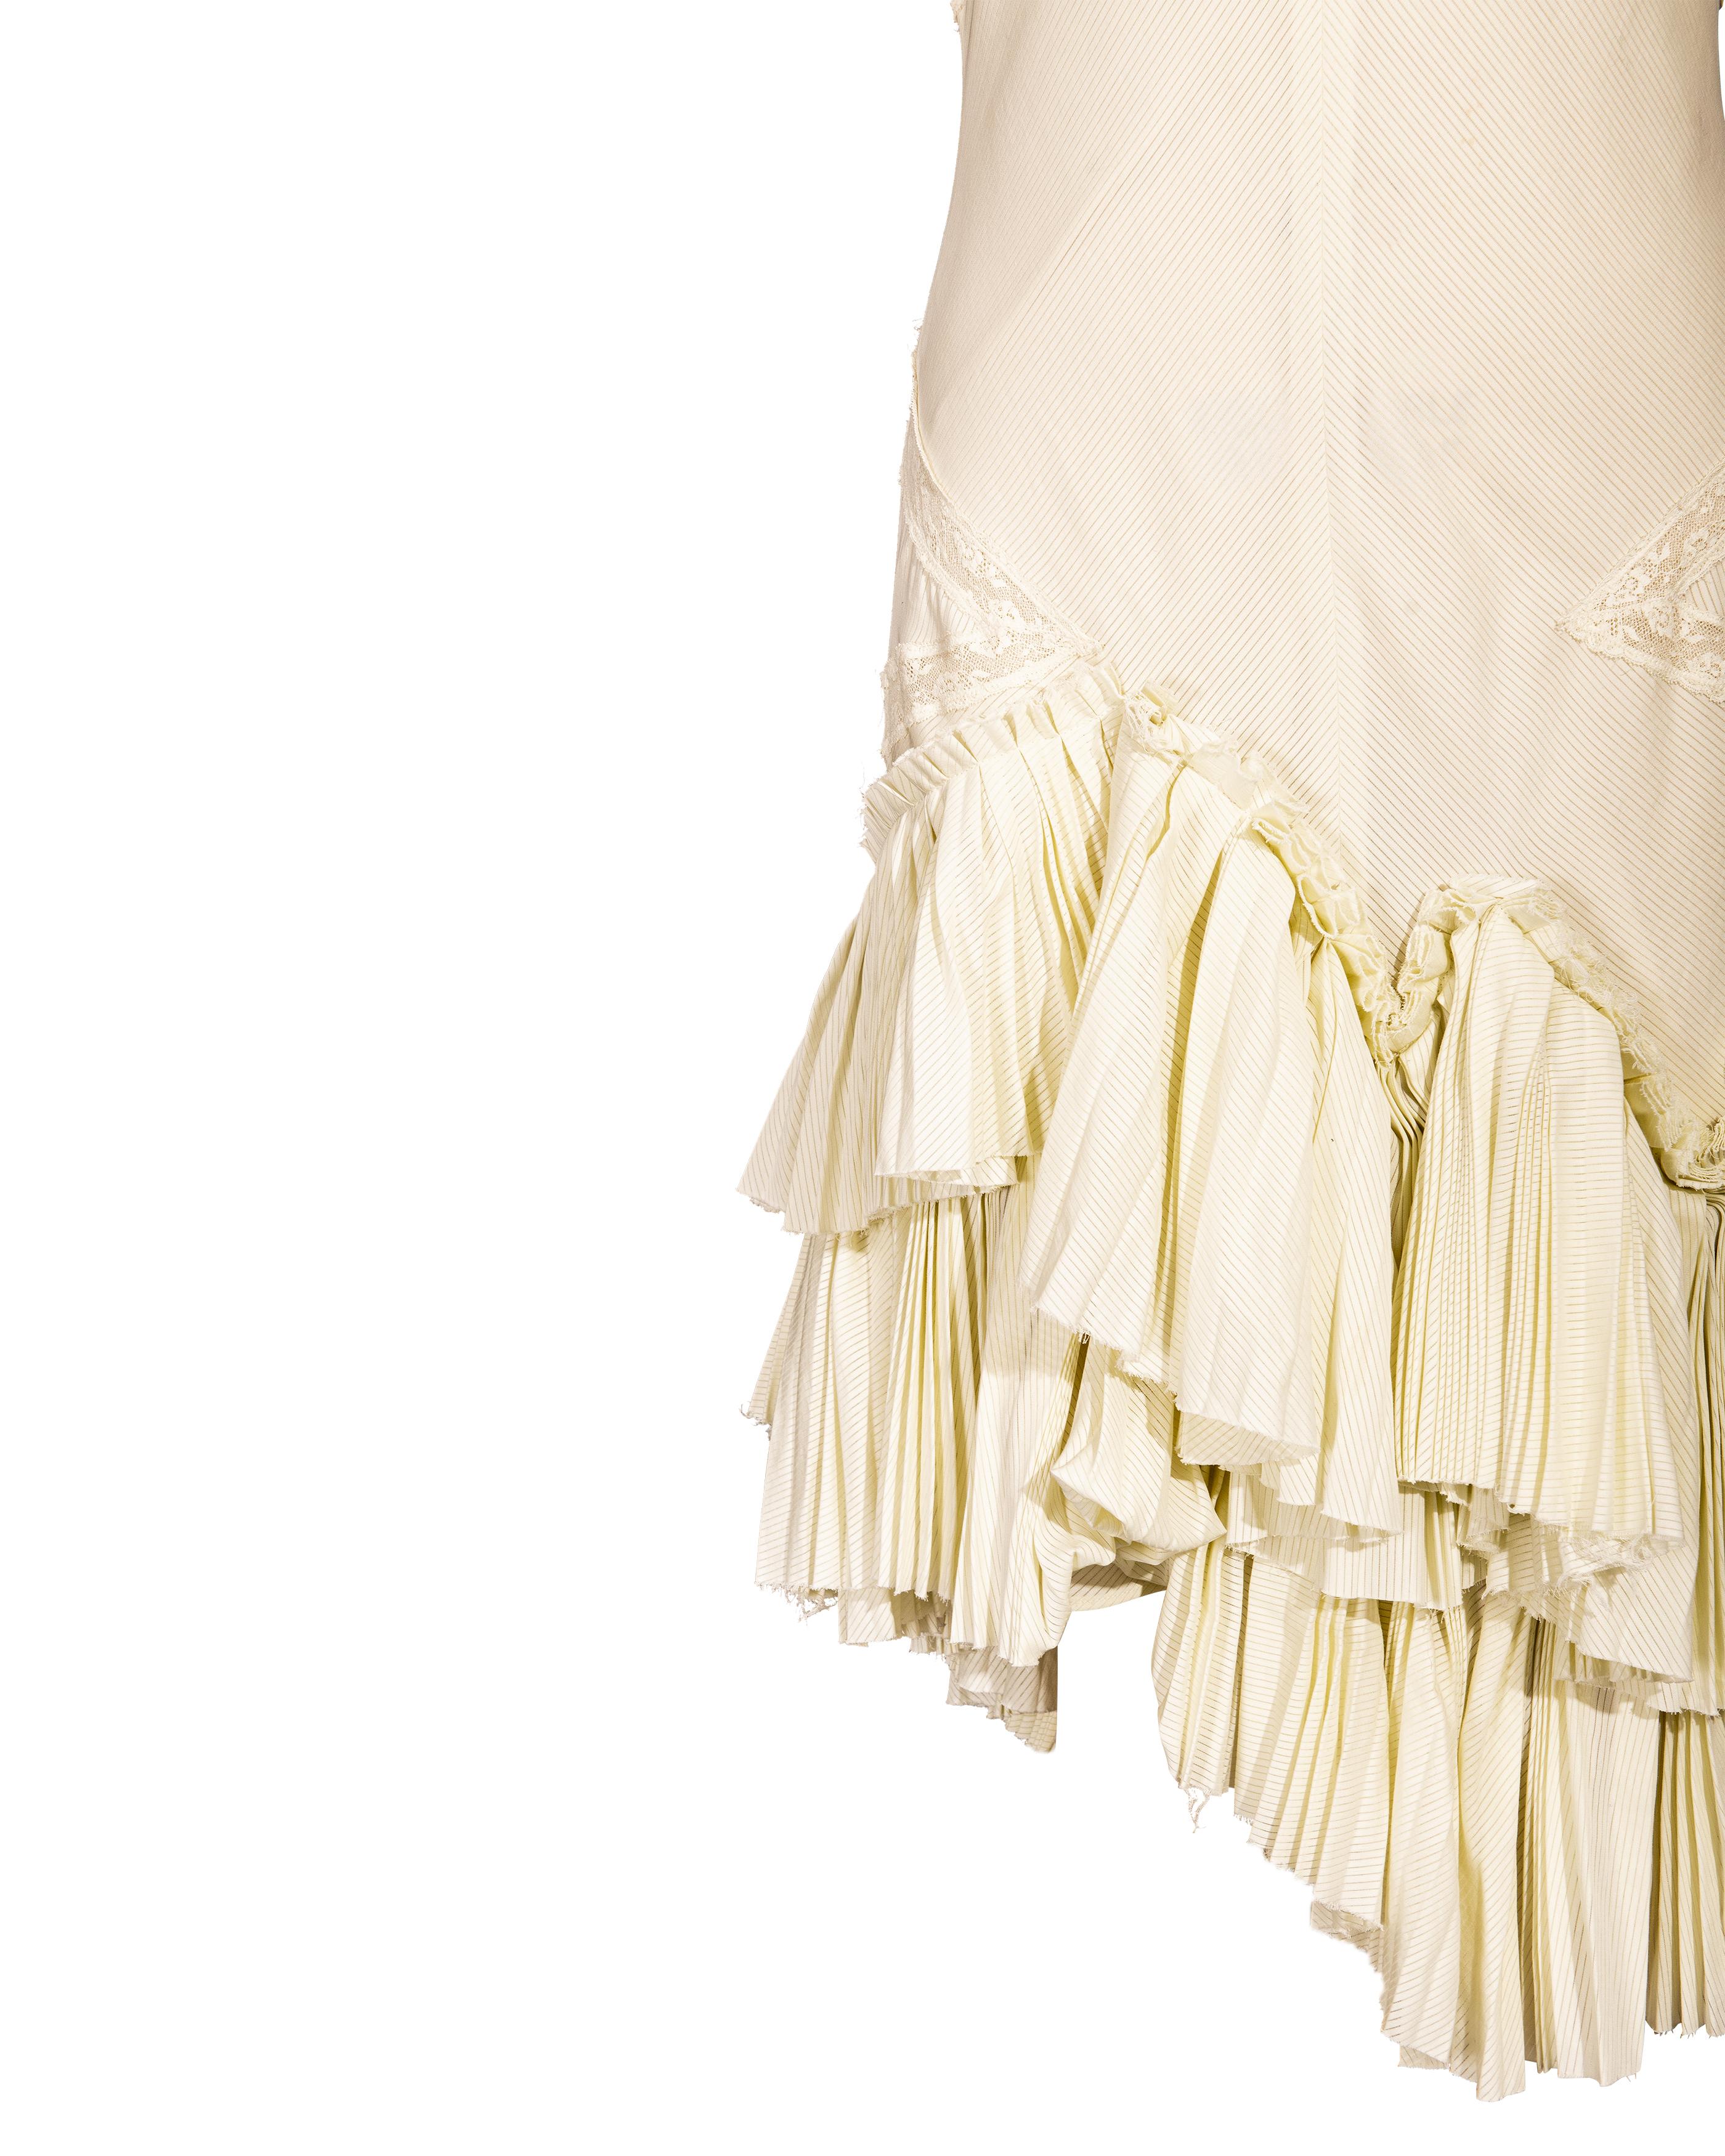 S/S 2005 Alexander McQueen (Lifetime) Pale Yellow Pleated and Lace Cotton Dress For Sale 3